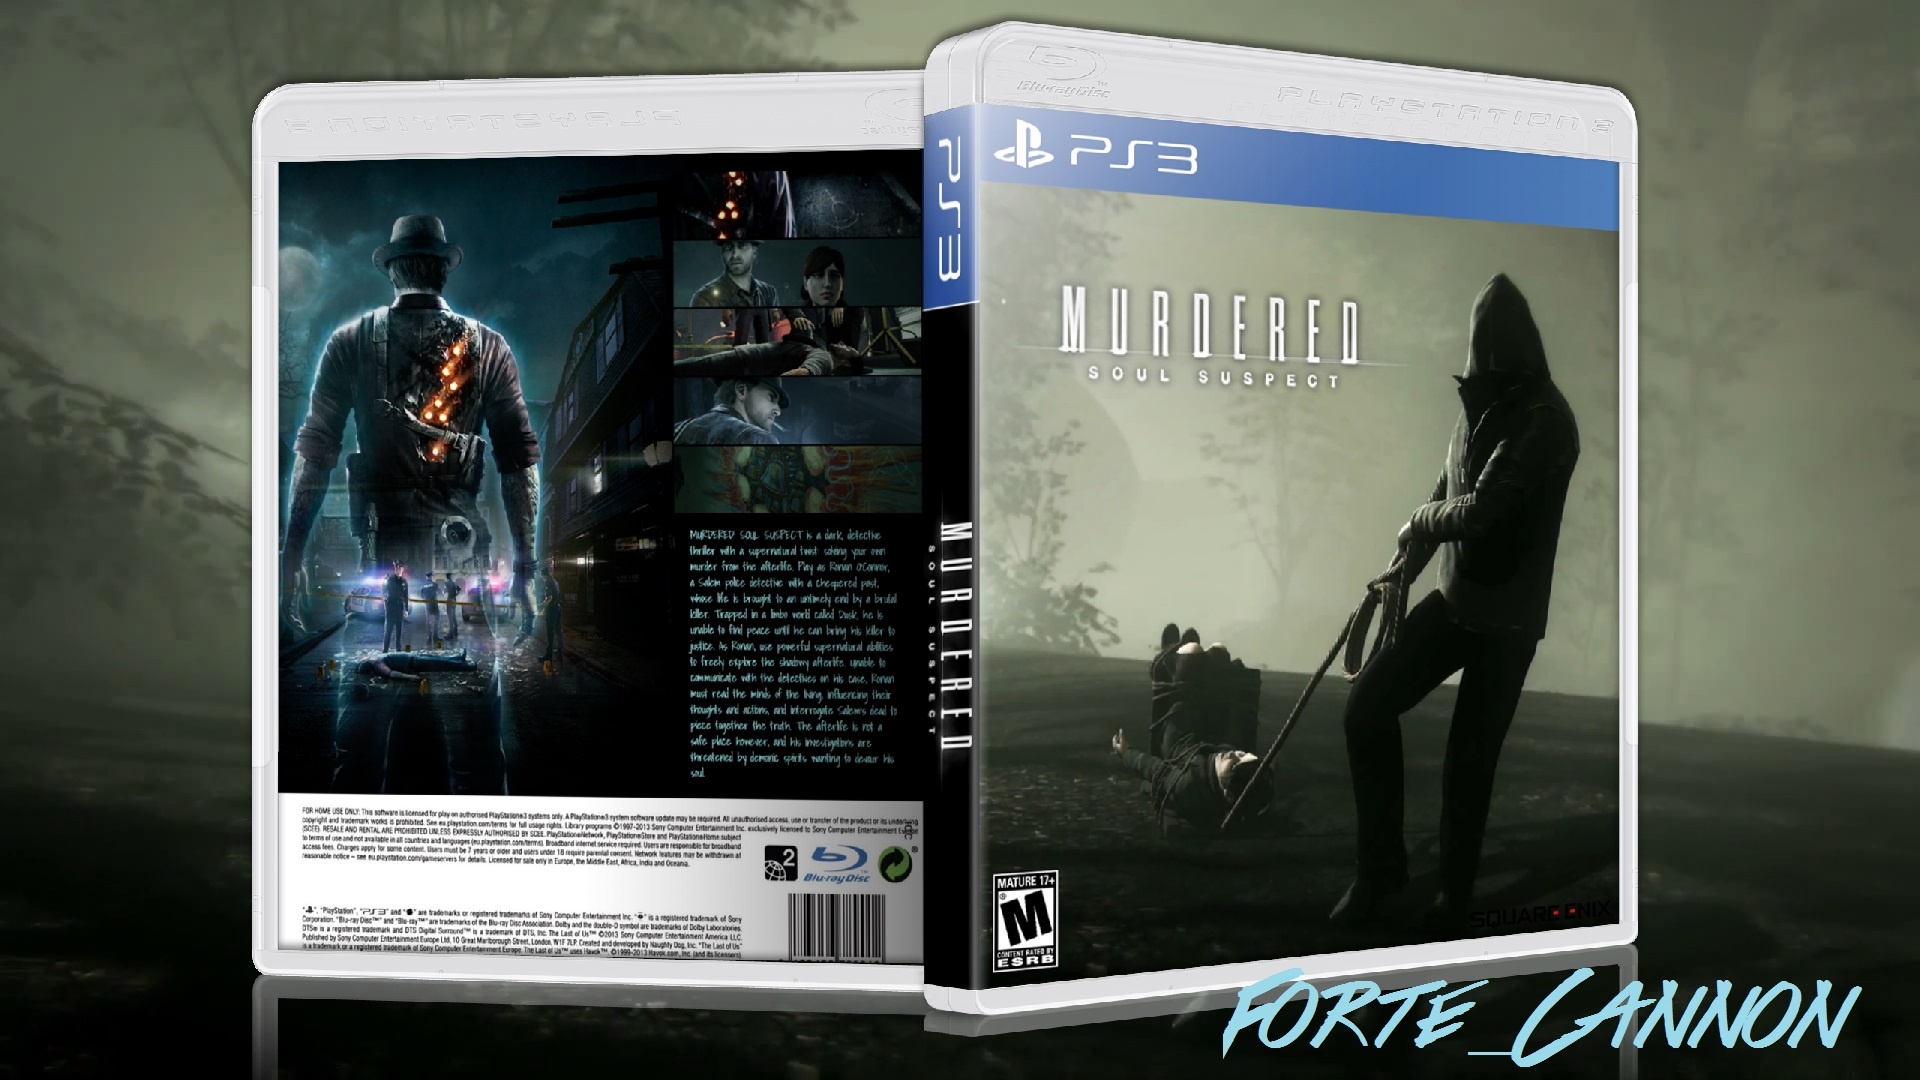 Murdered Soul Suspect box cover